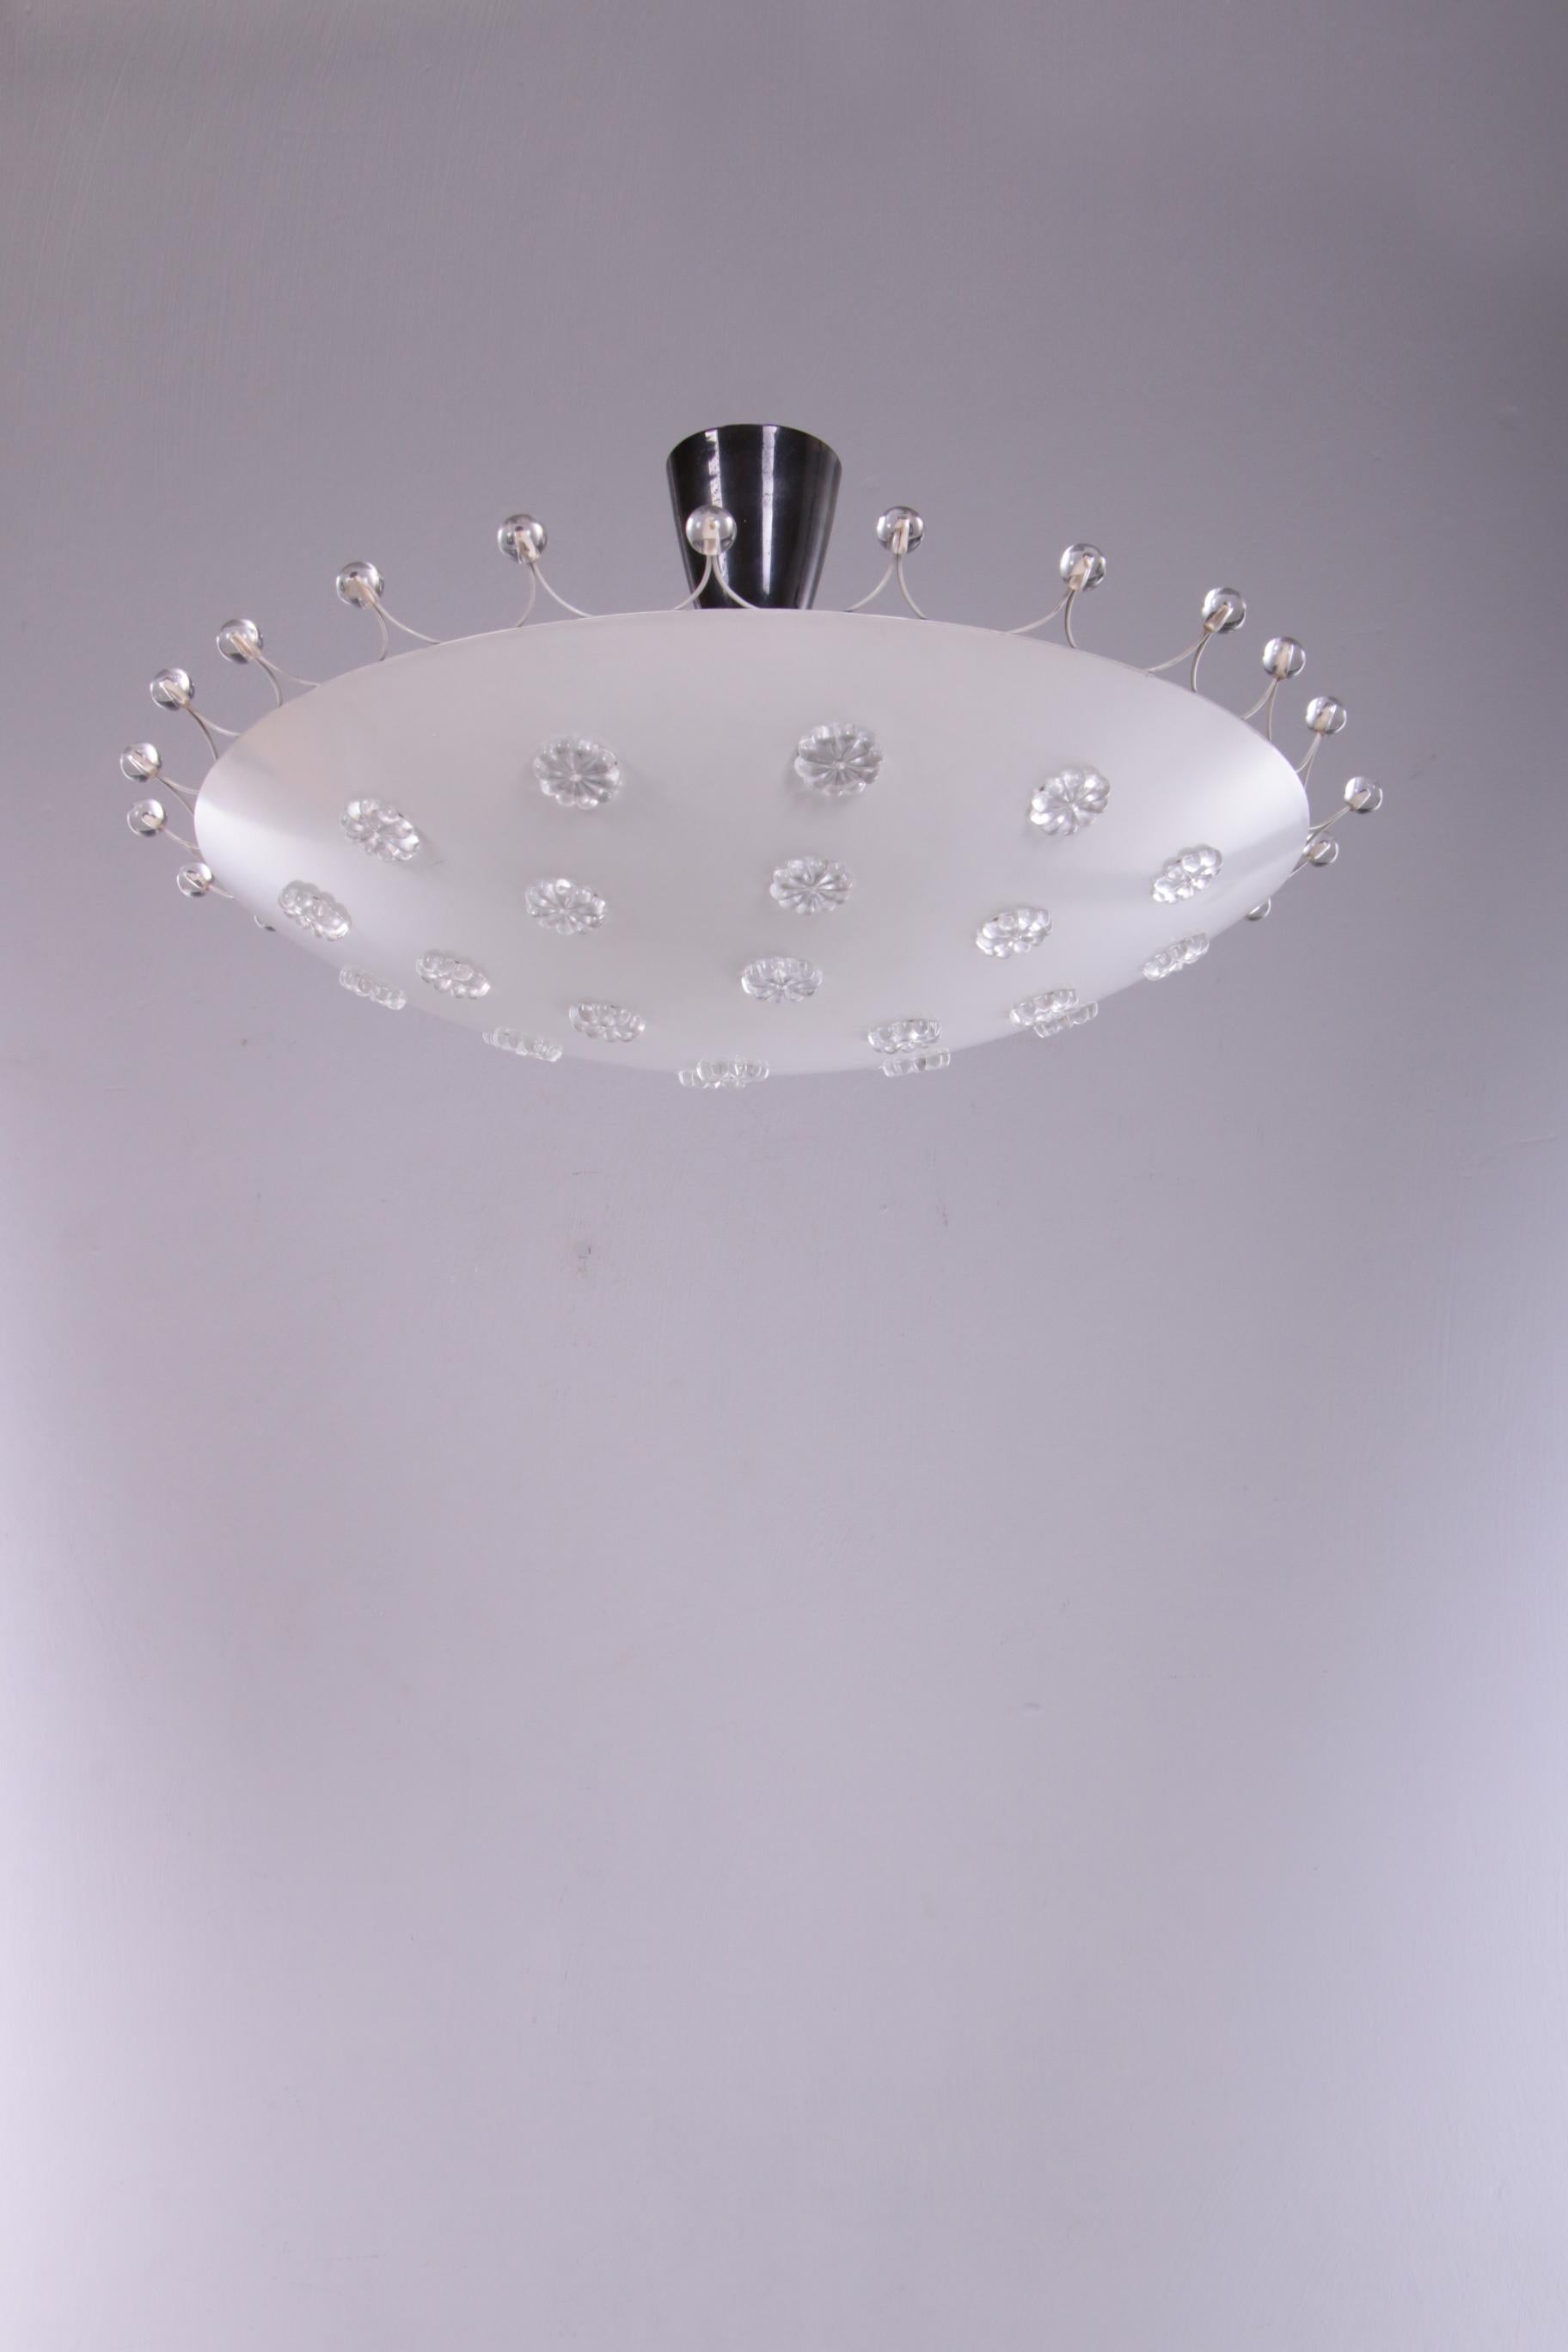 Emil Stejnar ceiling lamp for Rupert Nikoll, Austria 1950s


Large ceiling lamp by Emil Stejnar for Rupert Nikoll, Austria.

White steel perforated dish with glass flowers in the holes, white wire steel rim with glass balls, 4 E27 fittings.